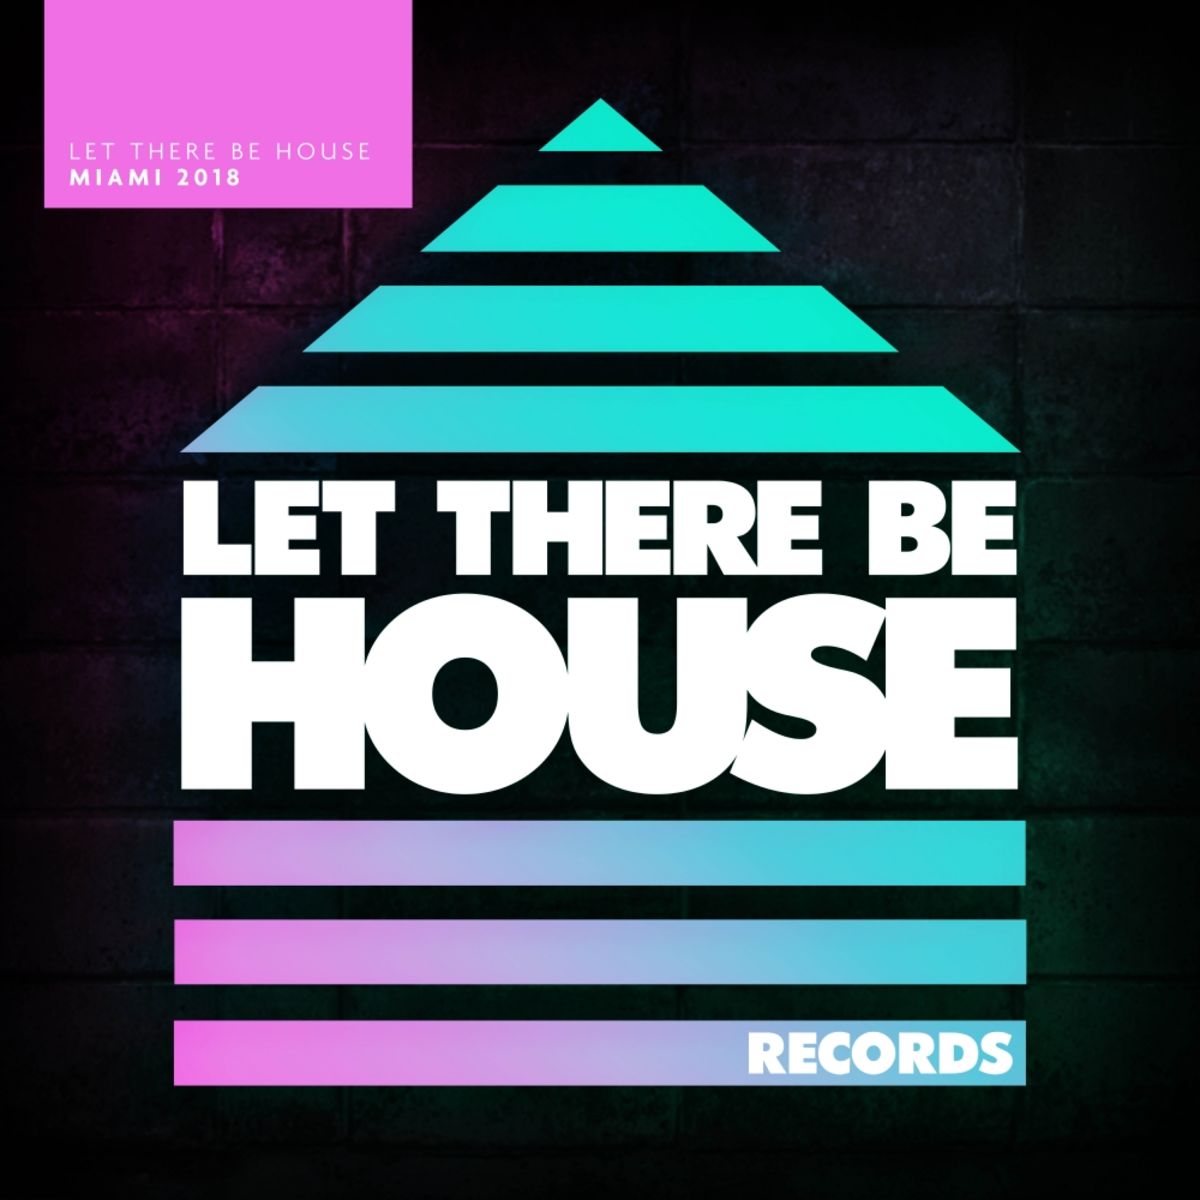 VA - Let There Be House Miami 2018 / Let There Be House Records